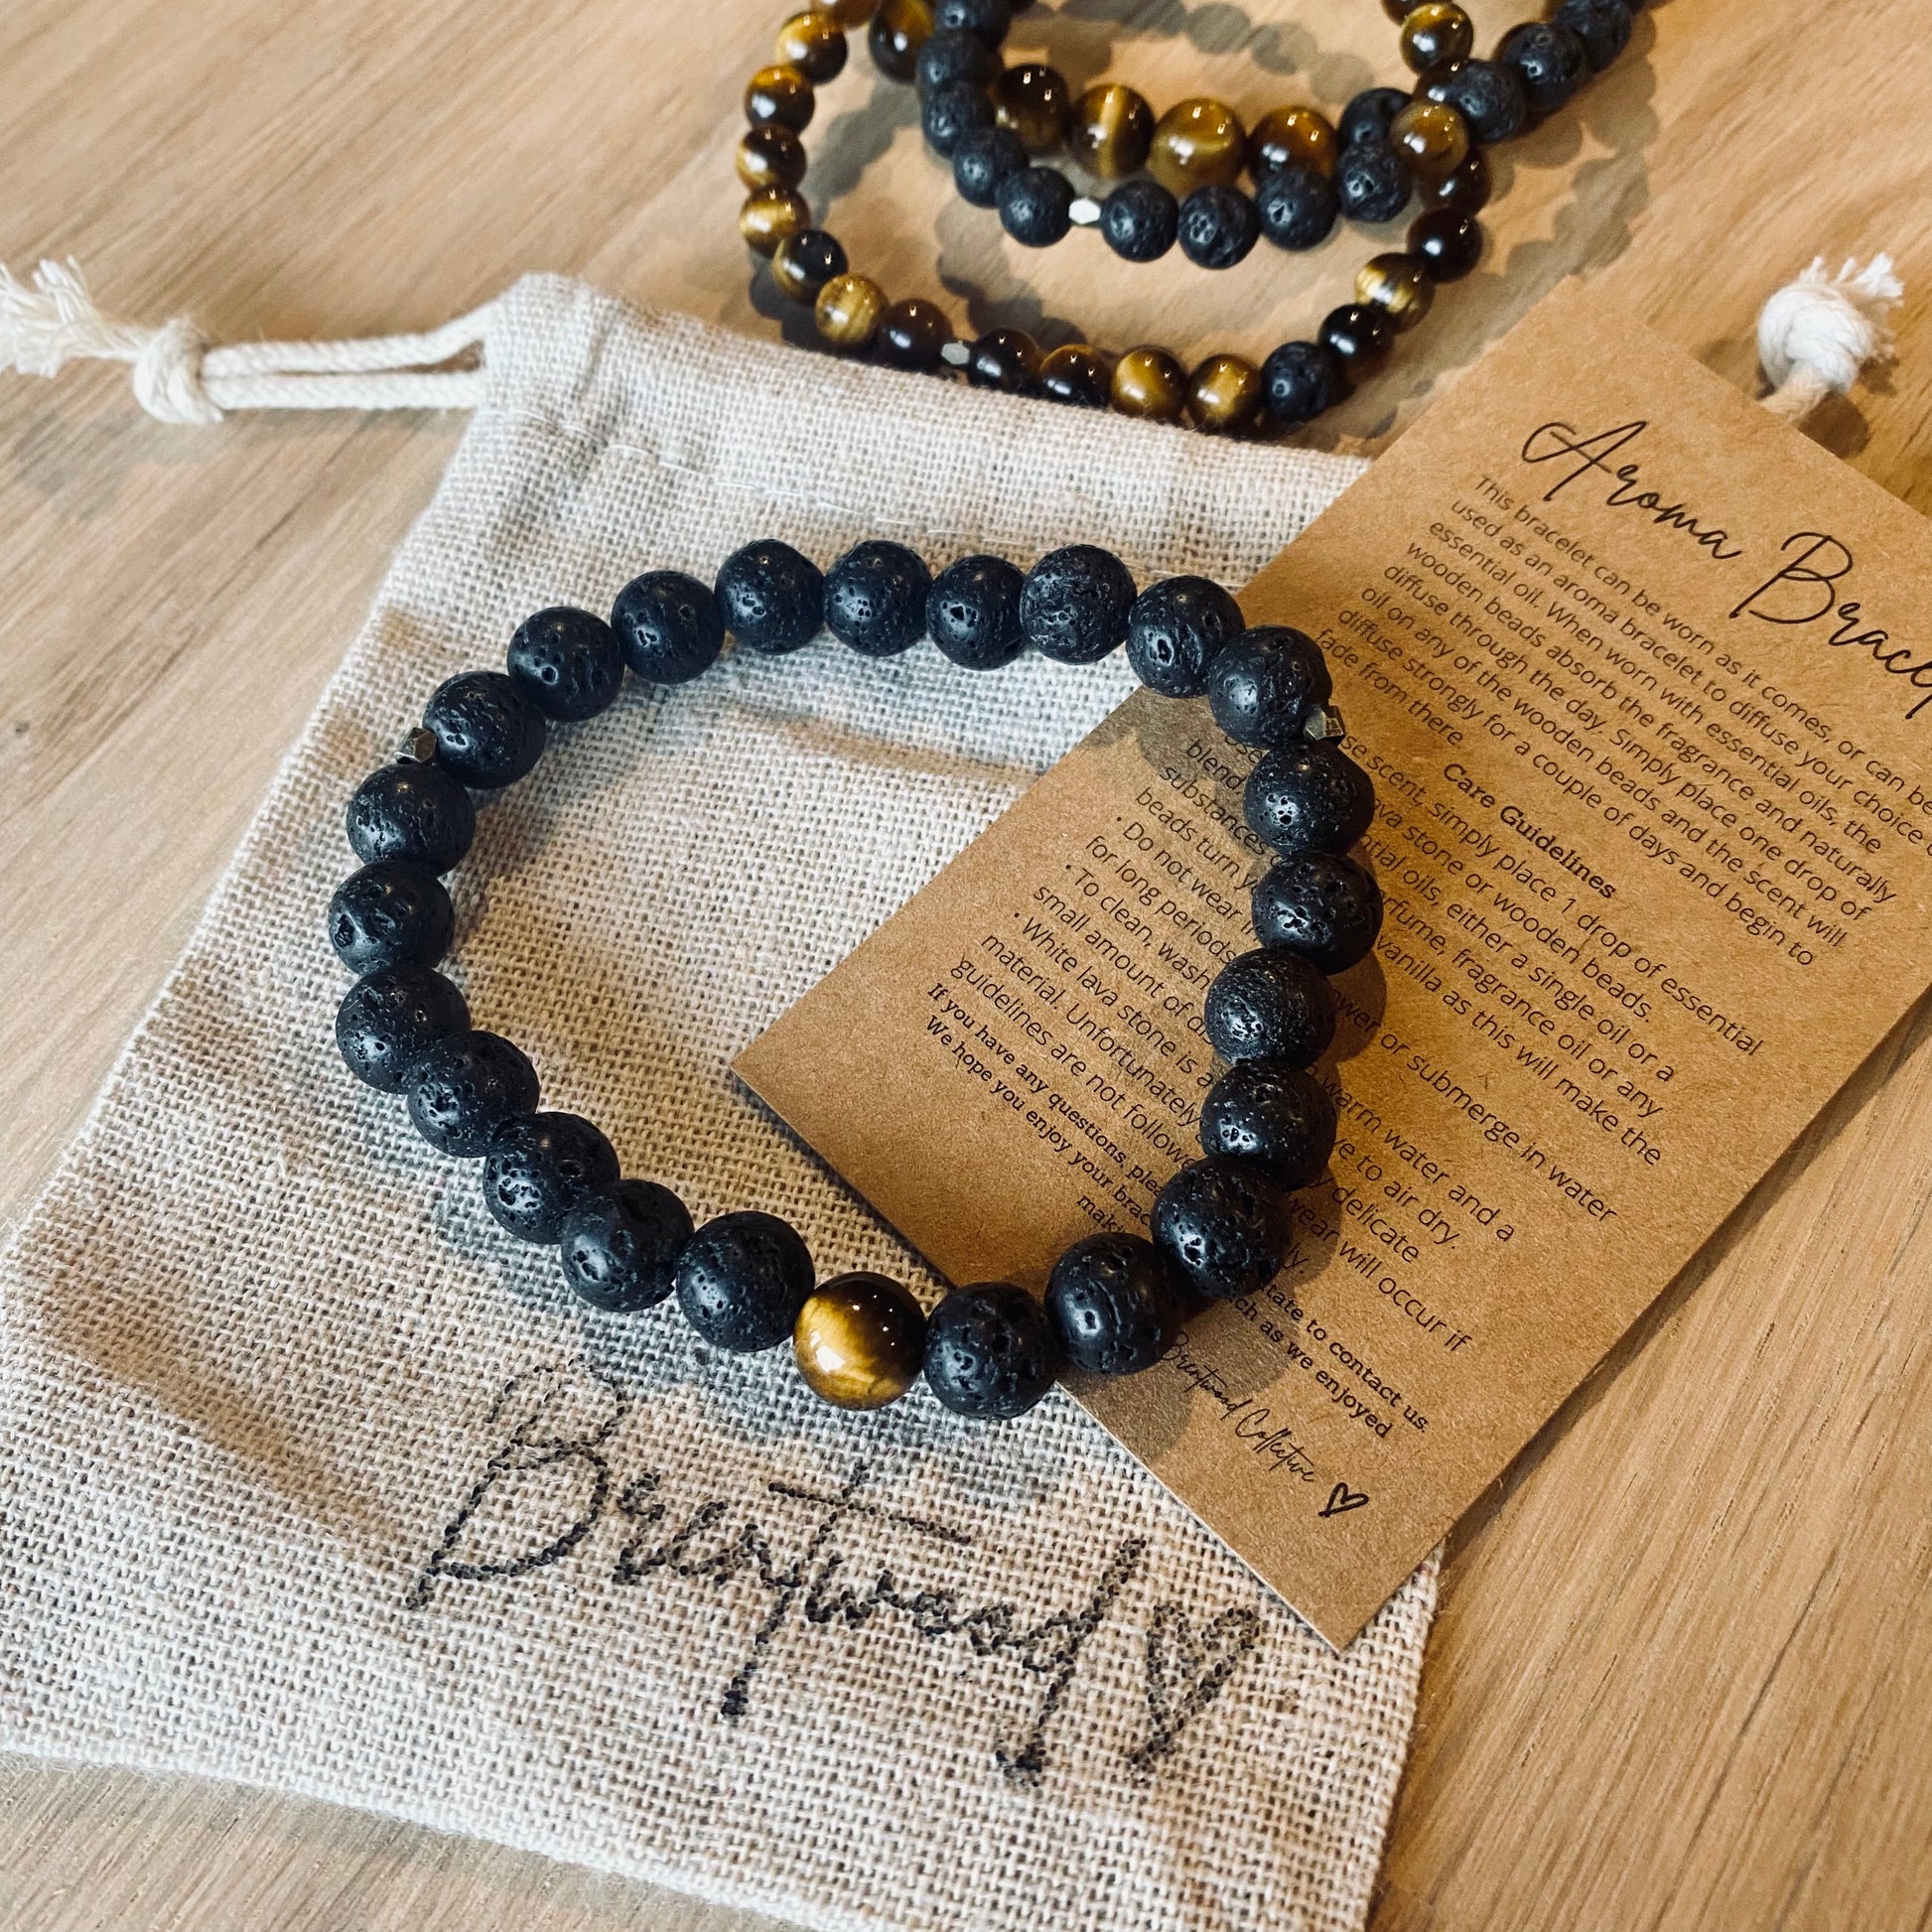 Lava 8 Aroma Bracelet - 8mm beaded diffuser bracelet made from black lava stone & a single tiger eye bead with antiqued gold faceted embellishments. Laid on cloth pouch/drawstring bag stamped with “Brentwood” and an aroma bracelet information and care card on kraft brown card.